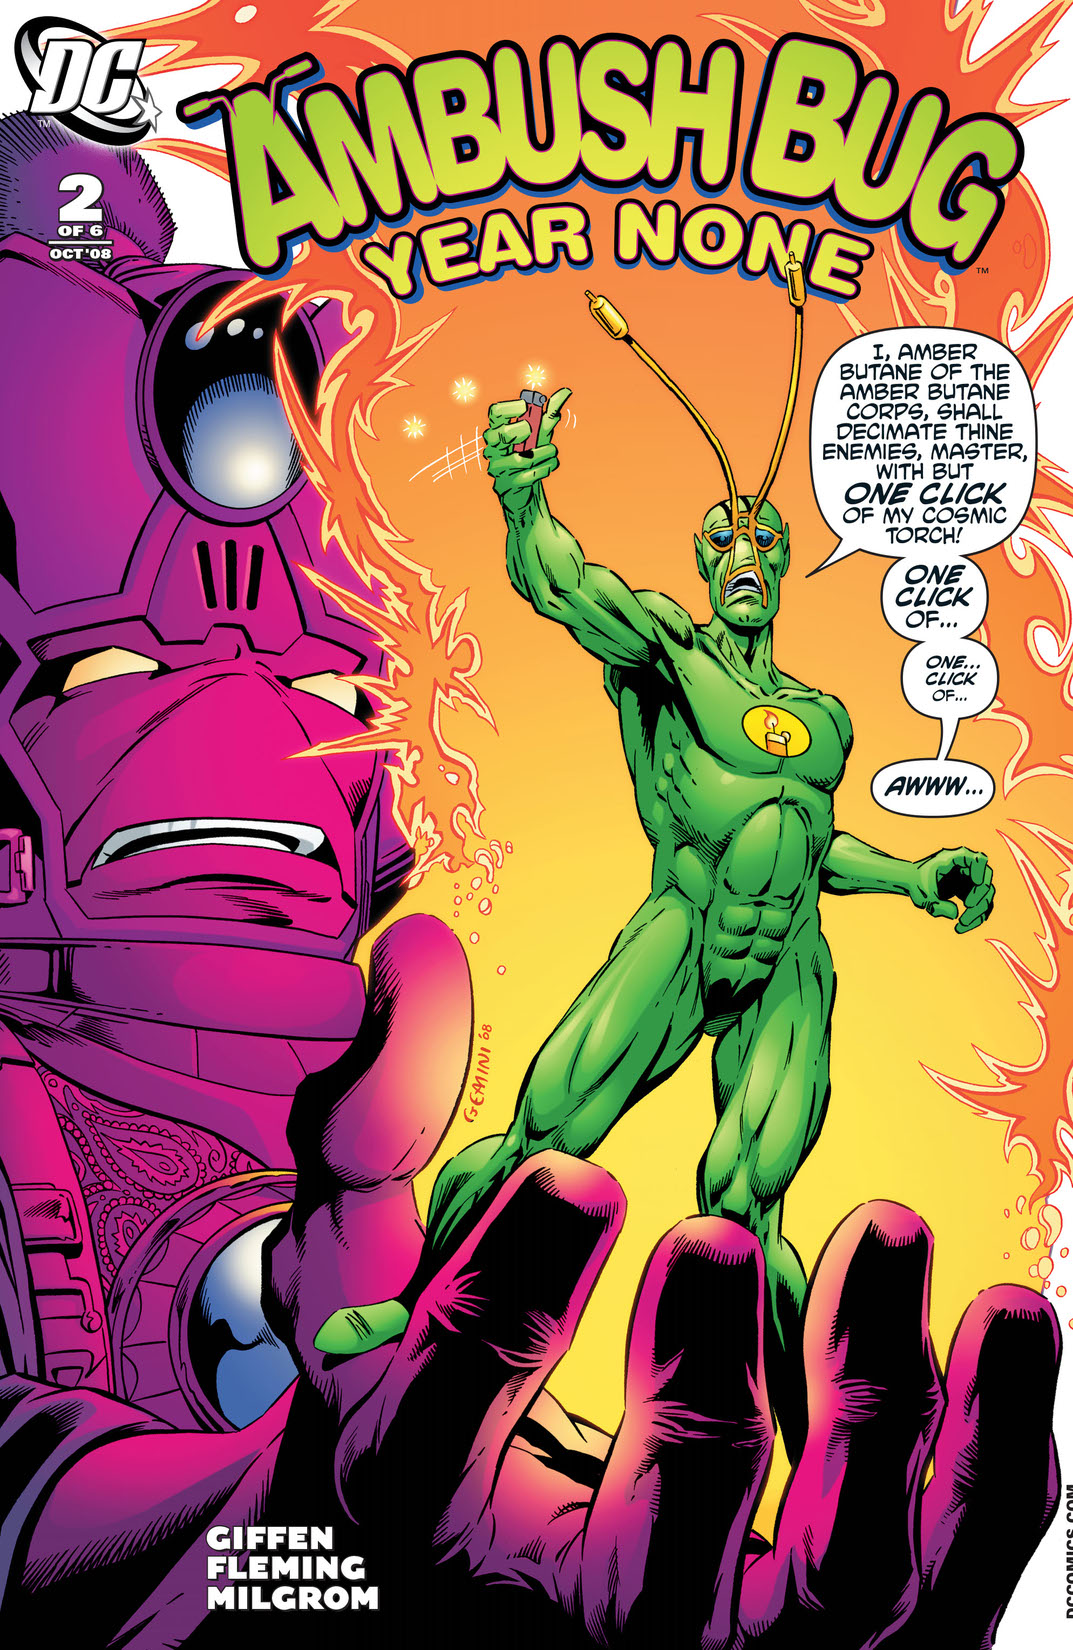 Ambush Bug: Year None #2 preview images